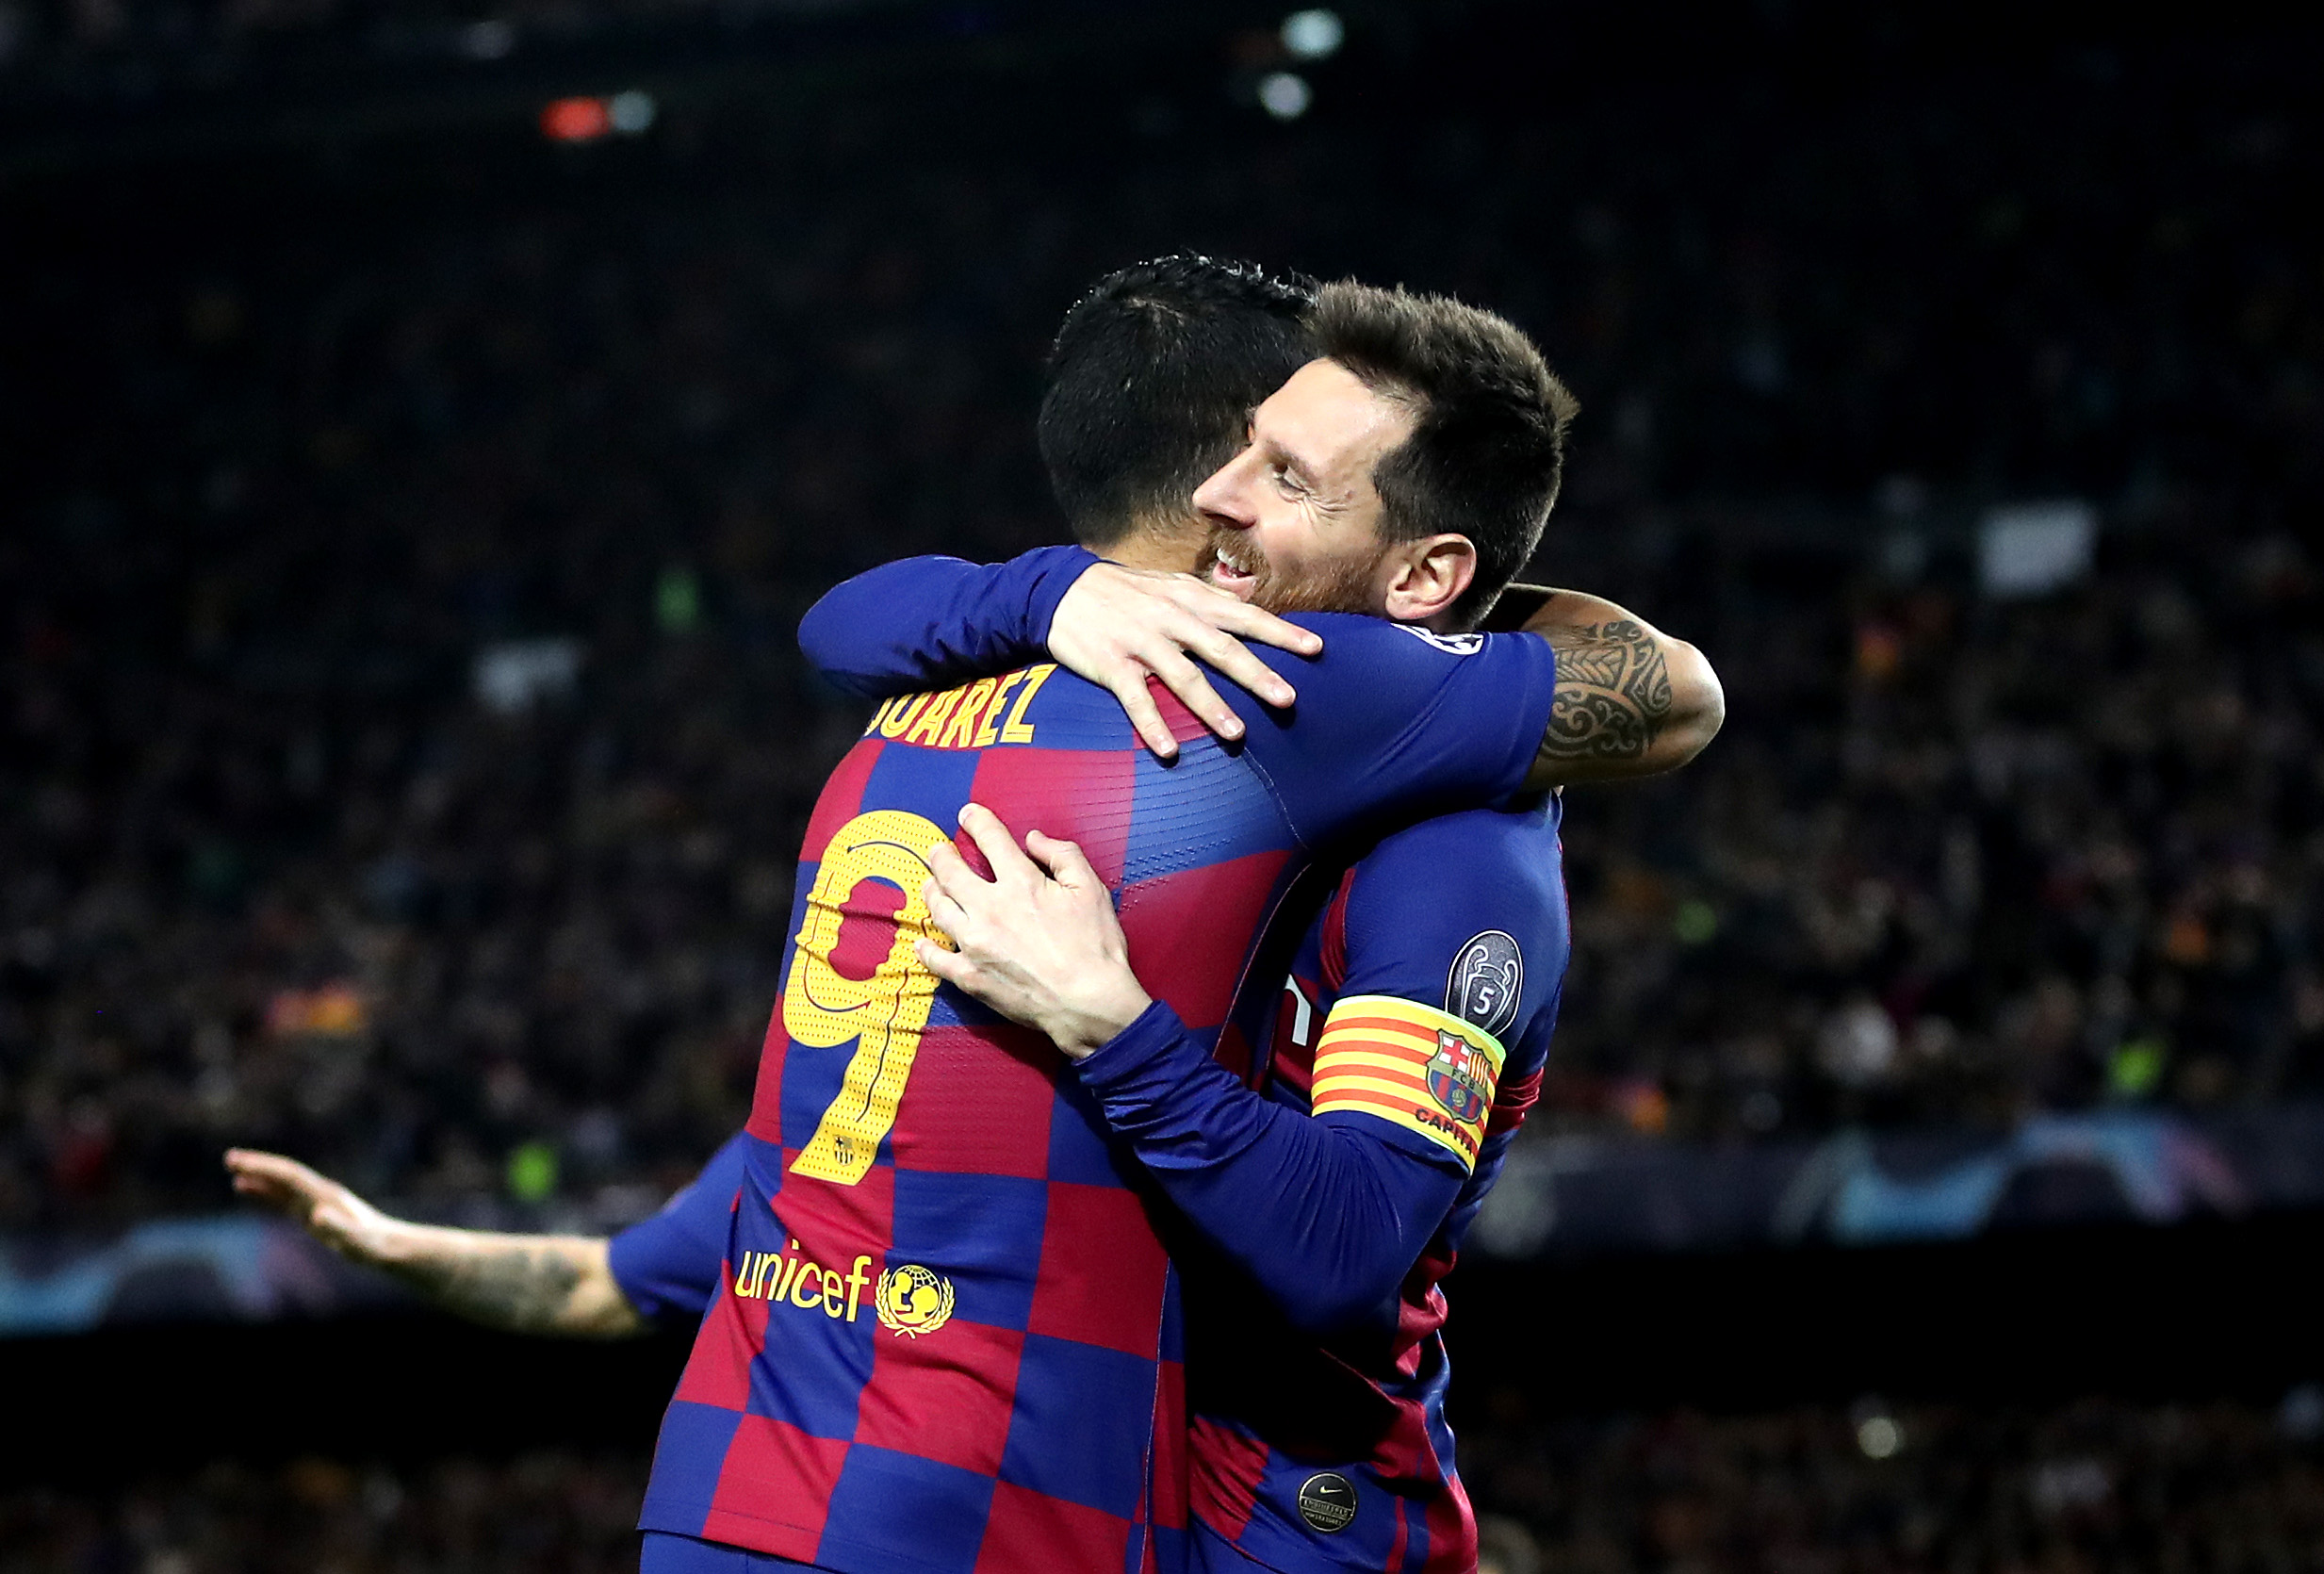 BARCELONA, SPAIN - NOVEMBER 27: Luis Suarez of FC Barcelona celebrates with teammate Lionel Messi after scoring his team's first goal during the UEFA Champions League group F match between FC Barcelona and Borussia Dortmund at Camp Nou on November 27, 2019 in Barcelona, Spain. (Photo by Maja Hitij/Bongarts/Getty Images)